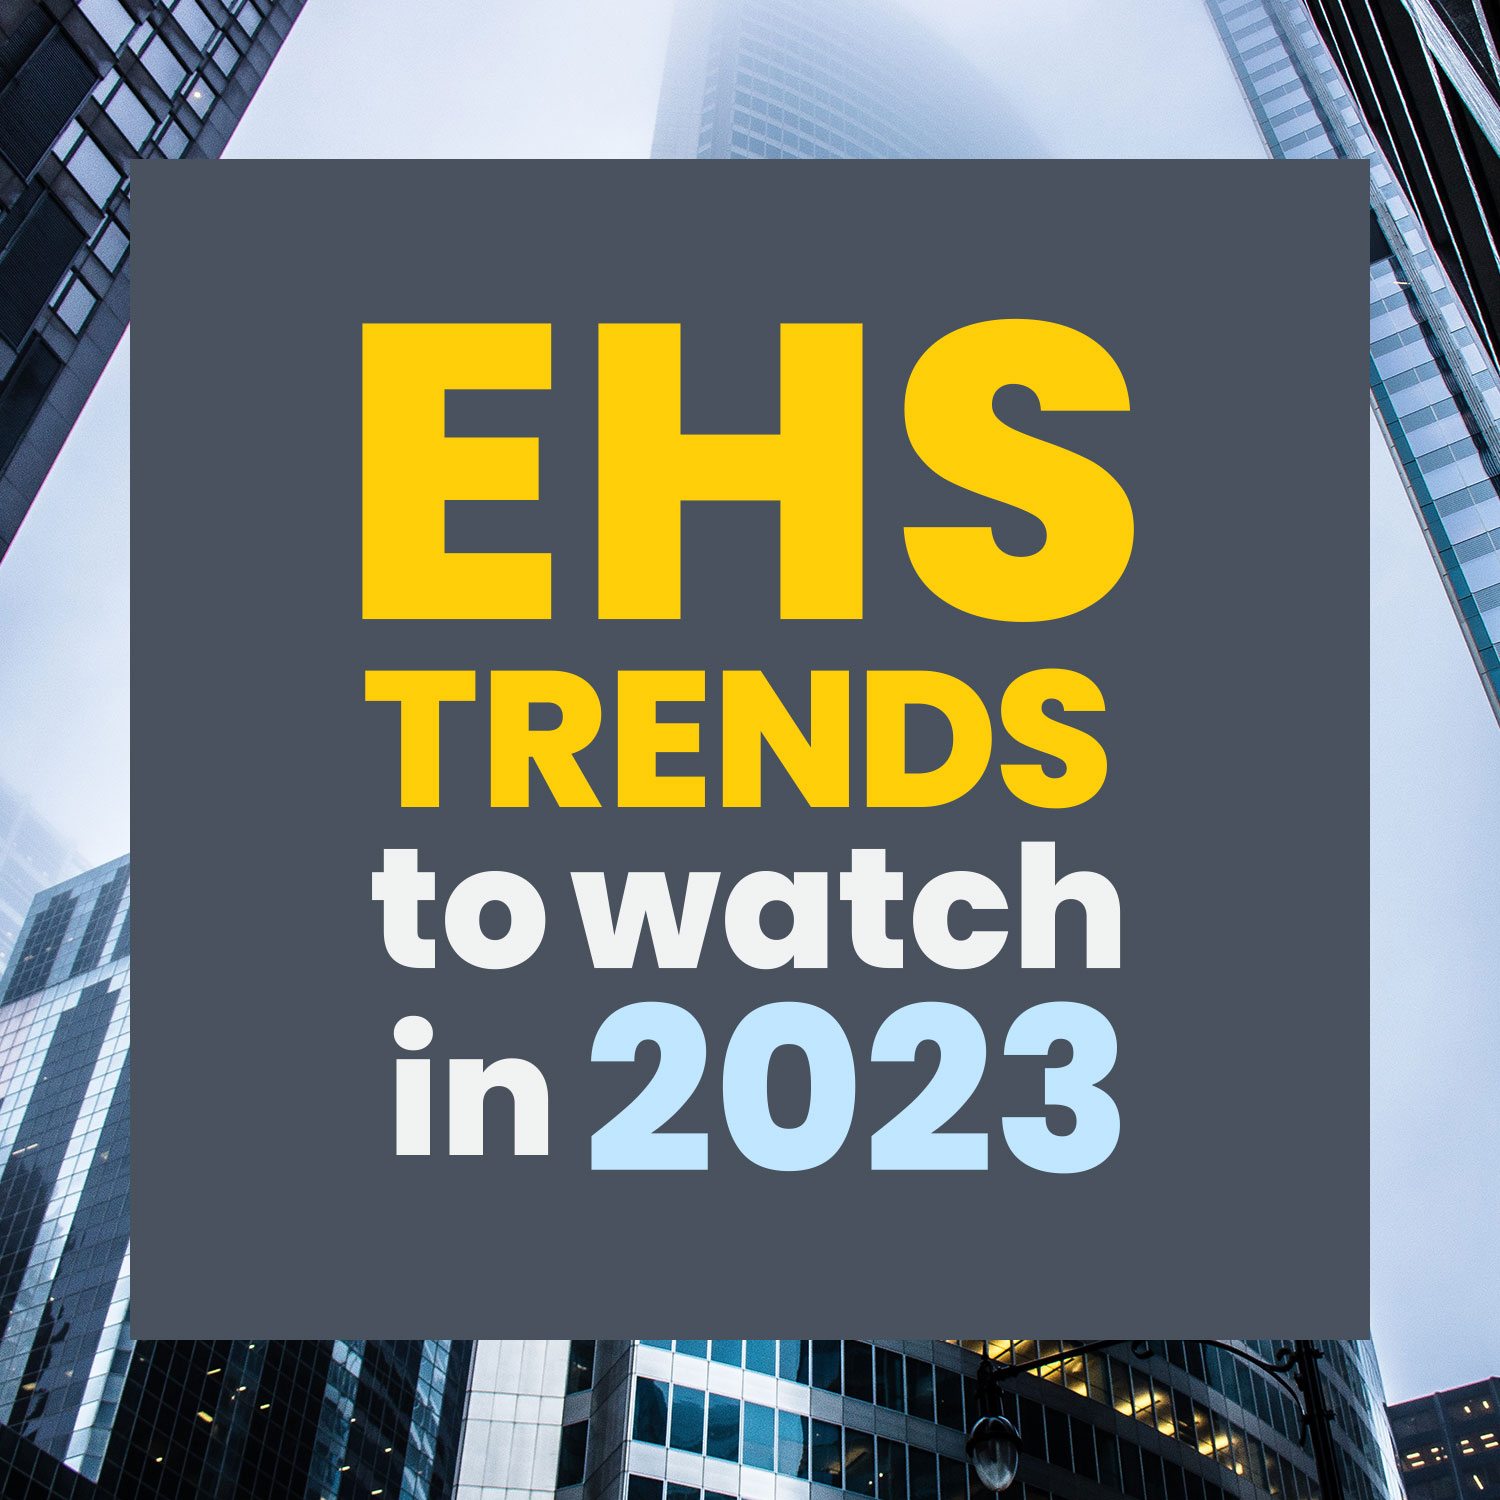 EHS Trends to watch in 2023